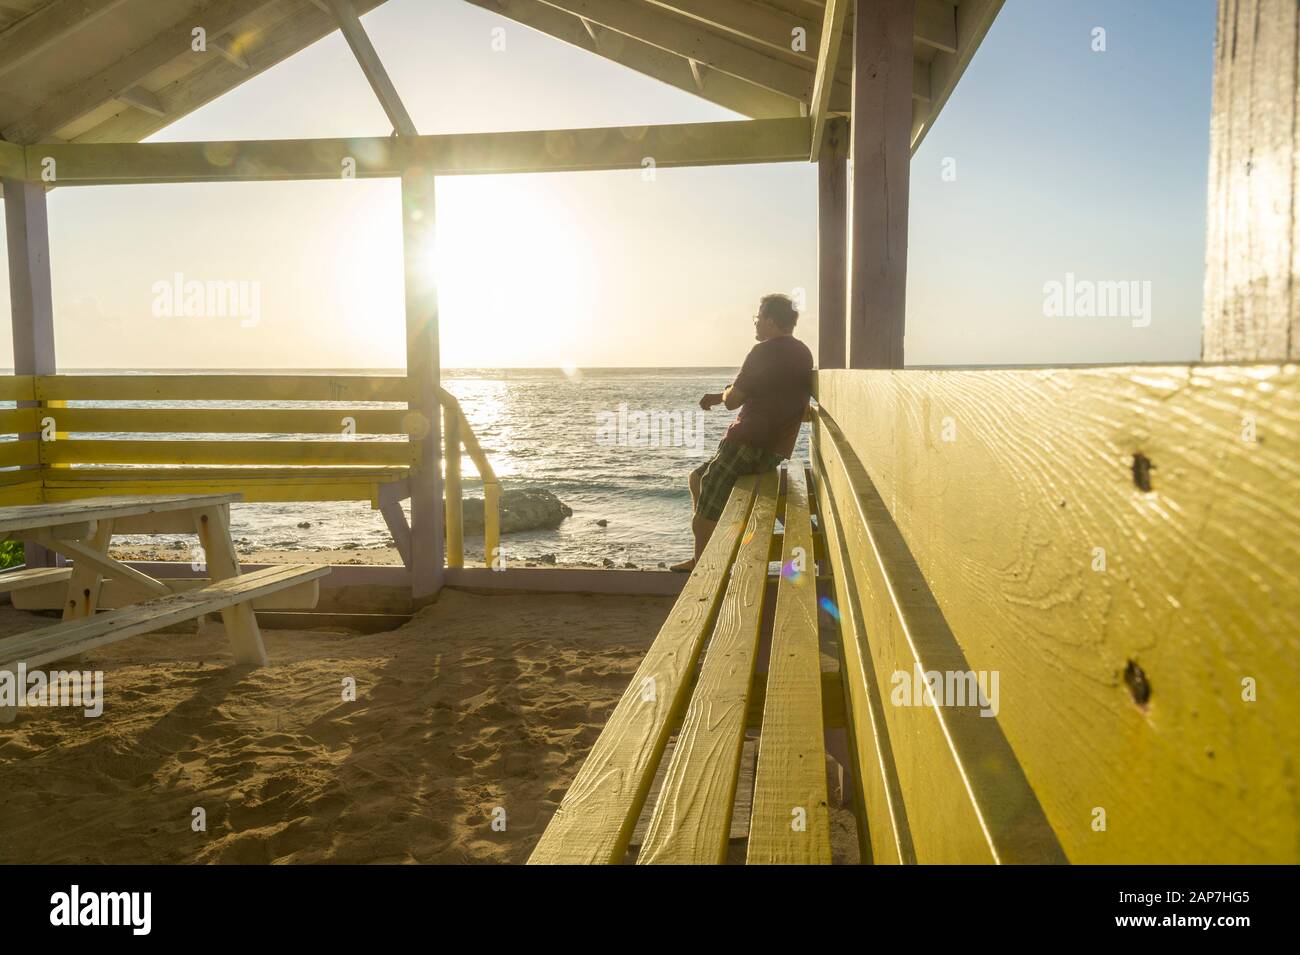 Man in solitude looking at sunrise ocean contemplatively Stock Photo